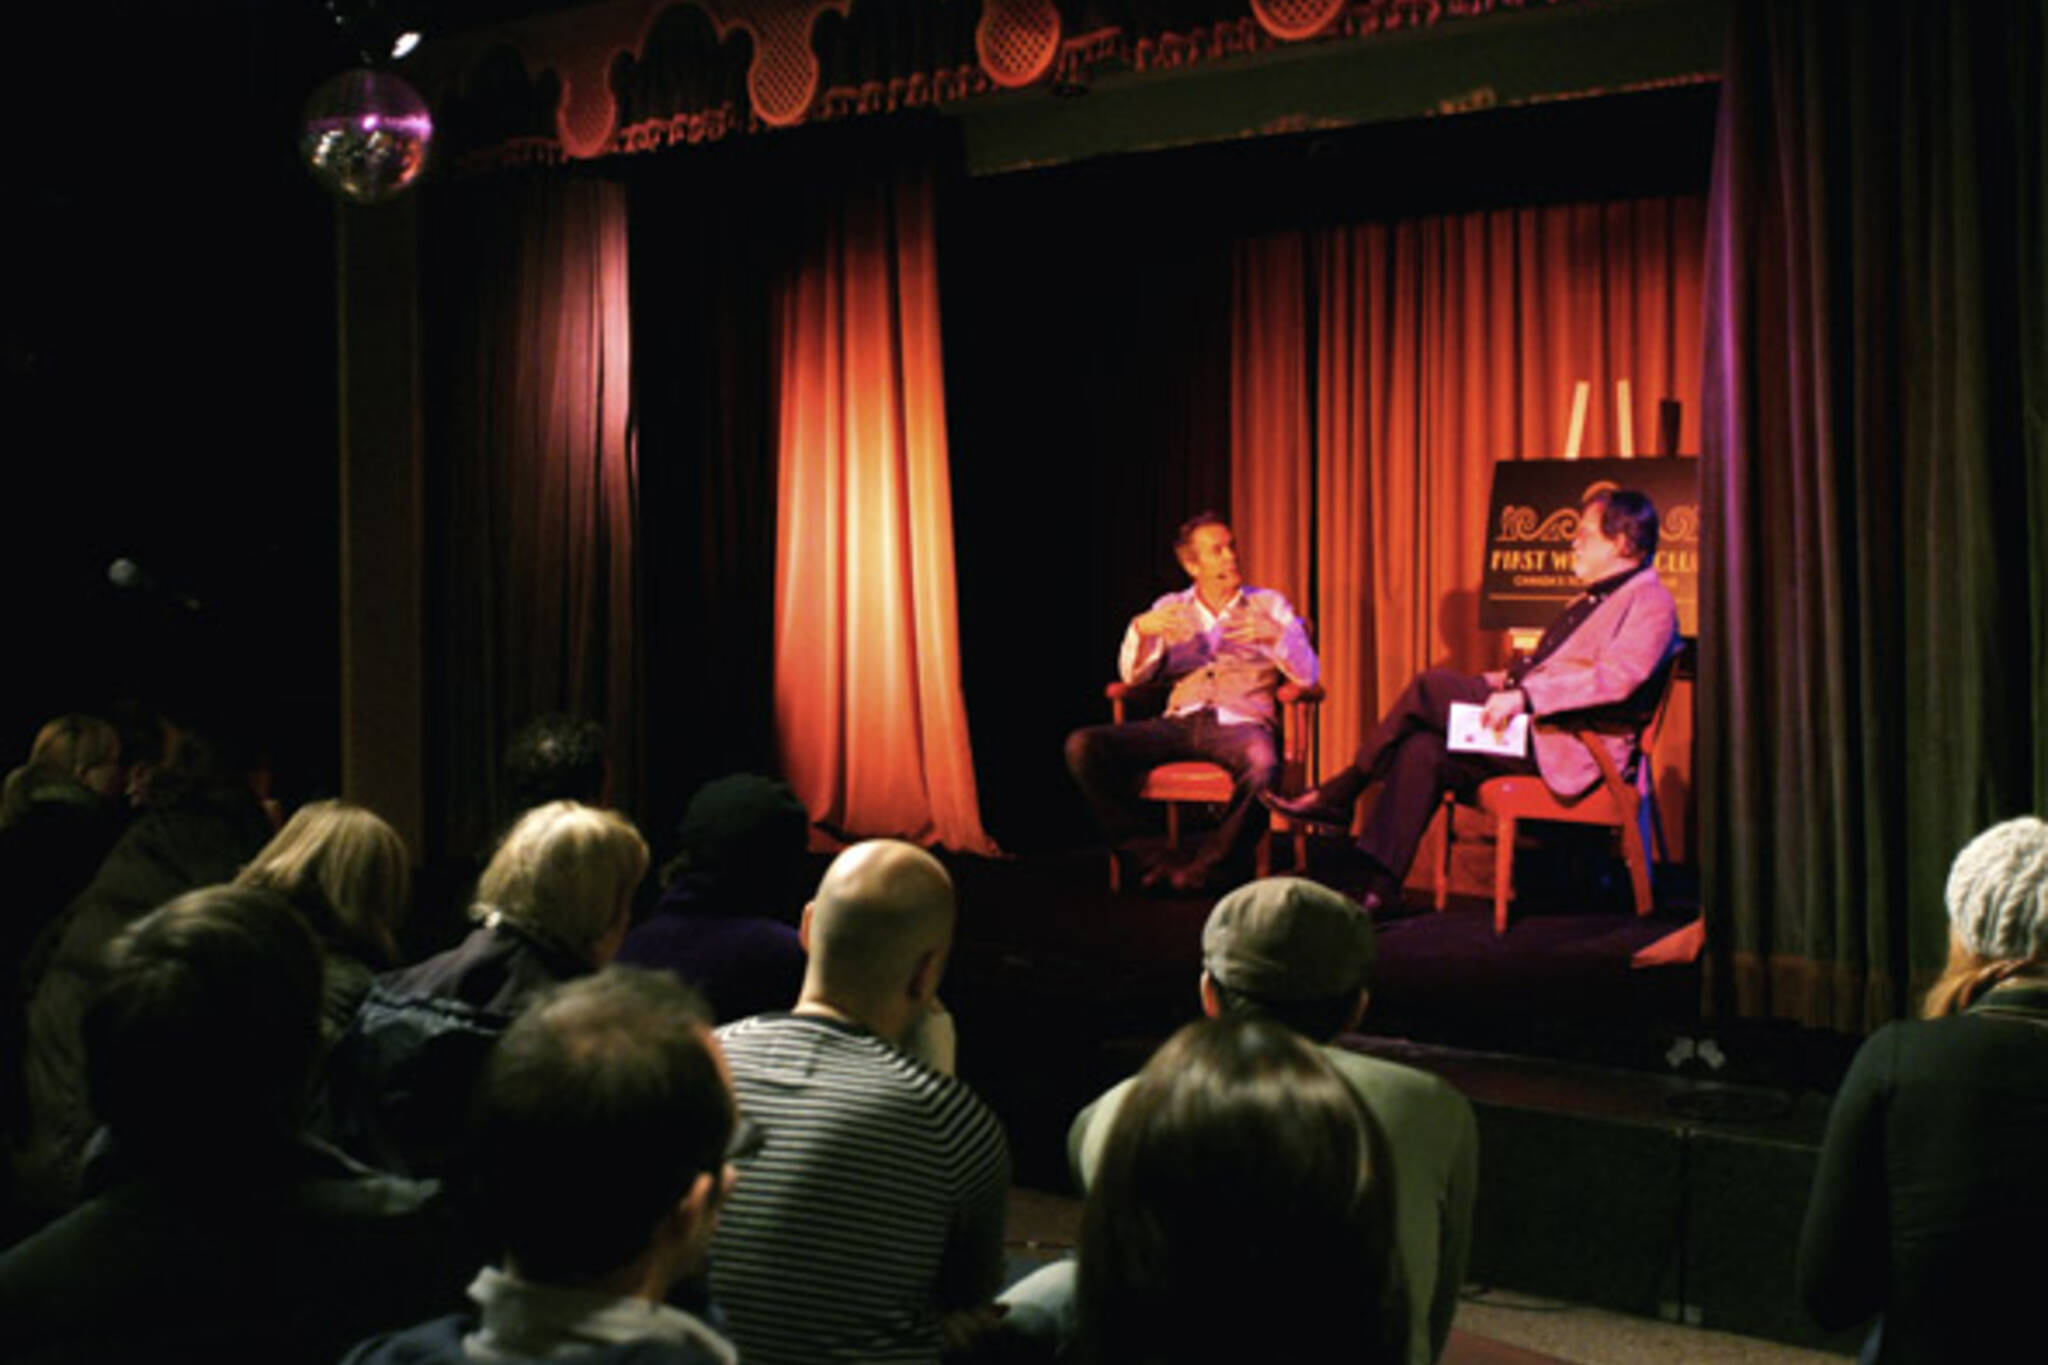 First Weekend Club Q&A with C.R.A.Z.Y. film director Jean-Marc Valee at The Drake Hotel Underground